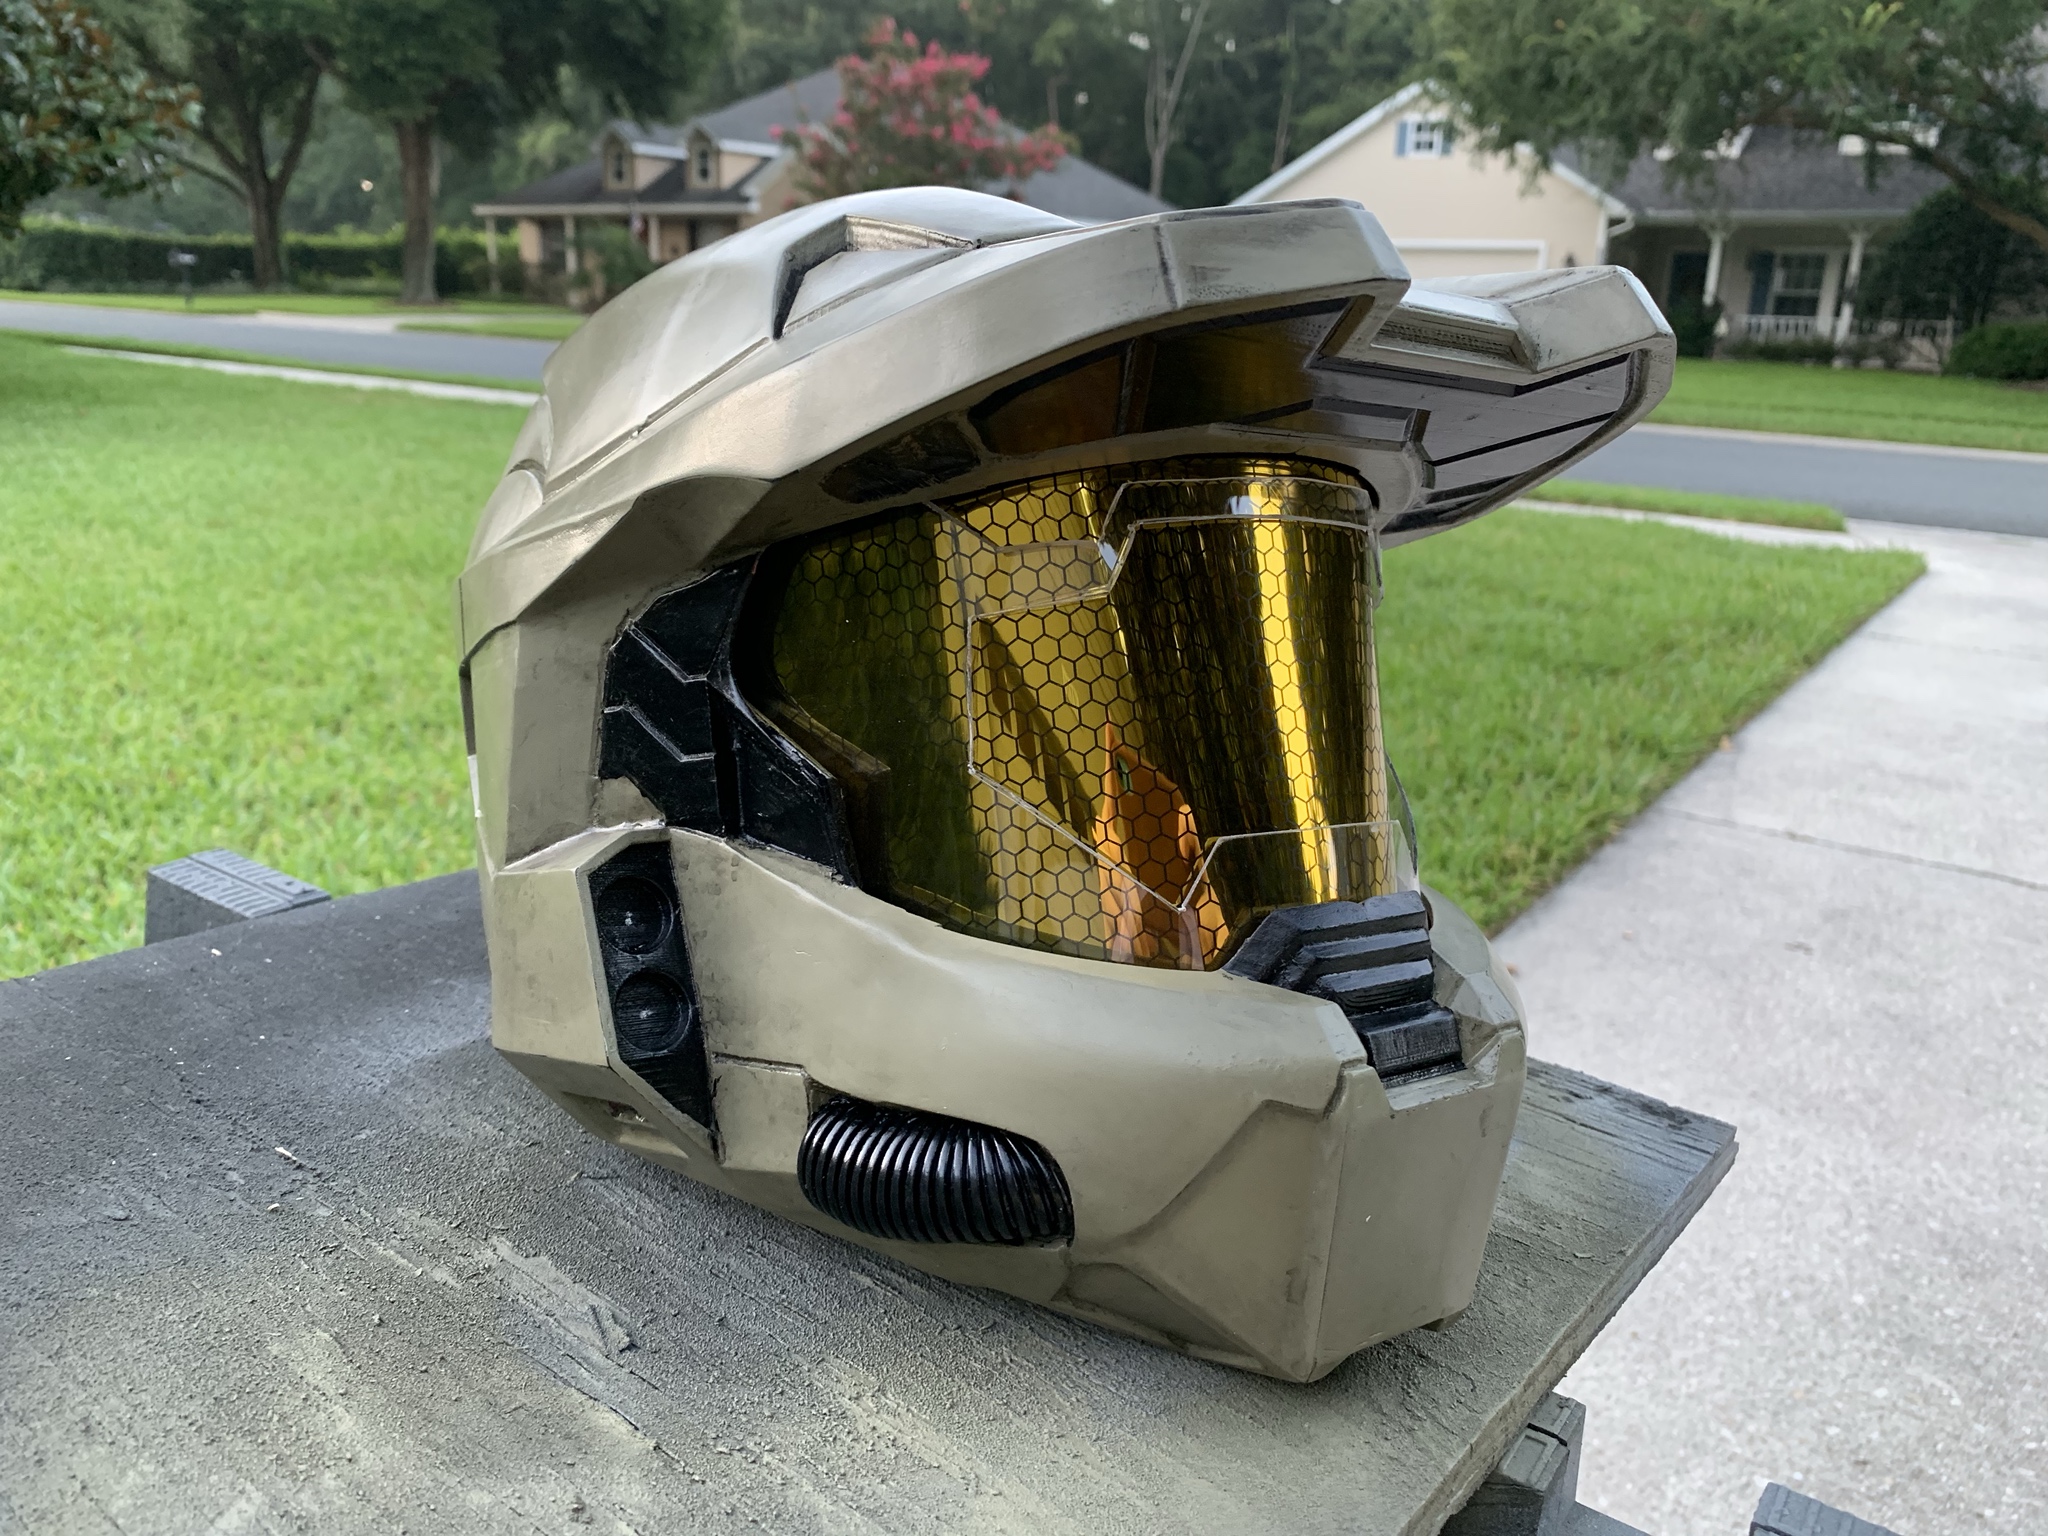 Burt's Master Chief & ODST build | Page 5 | Halo Costume and Prop Maker ...